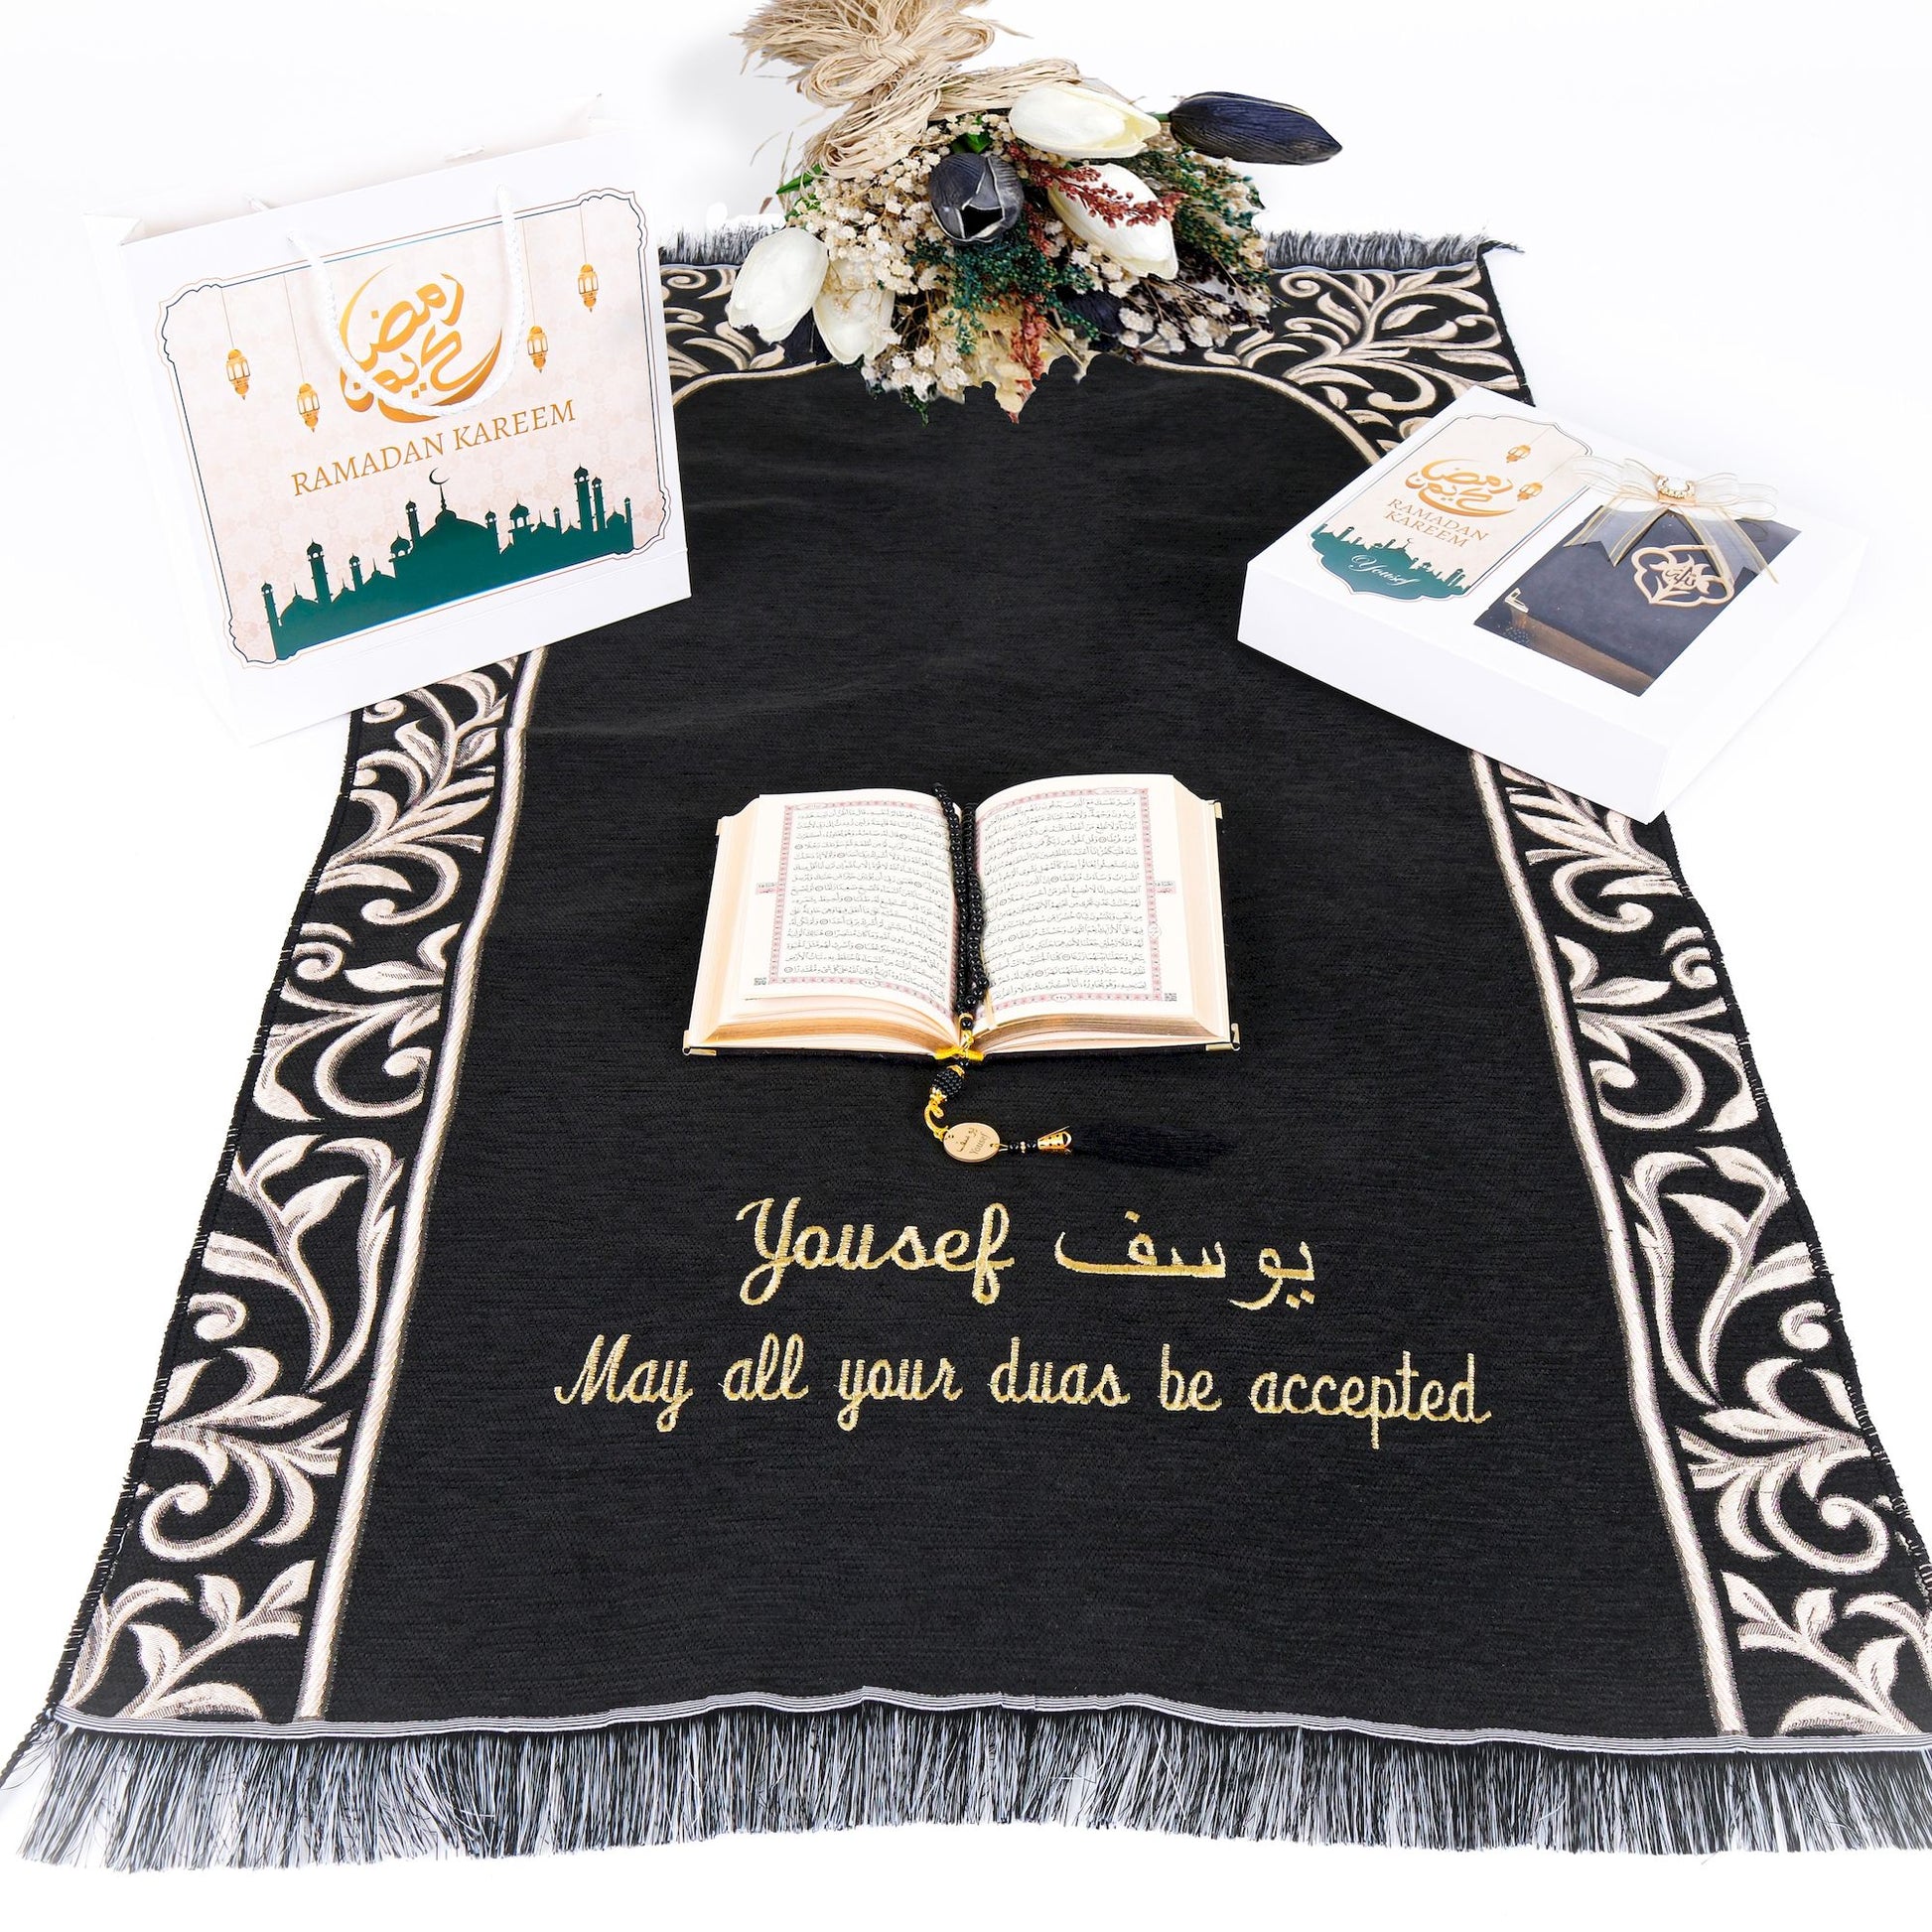 Personalized Flowery Prayer Mat Quran Tasbeeh Islamic Muslim Gift Set - Islamic Elite Favors is a handmade gift shop offering a wide variety of unique and personalized gifts for all occasions. Whether you're looking for the perfect Ramadan, Eid, Hajj, wedding gift or something special for a birthday, baby shower or anniversary, we have something for everyone. High quality, made with love.